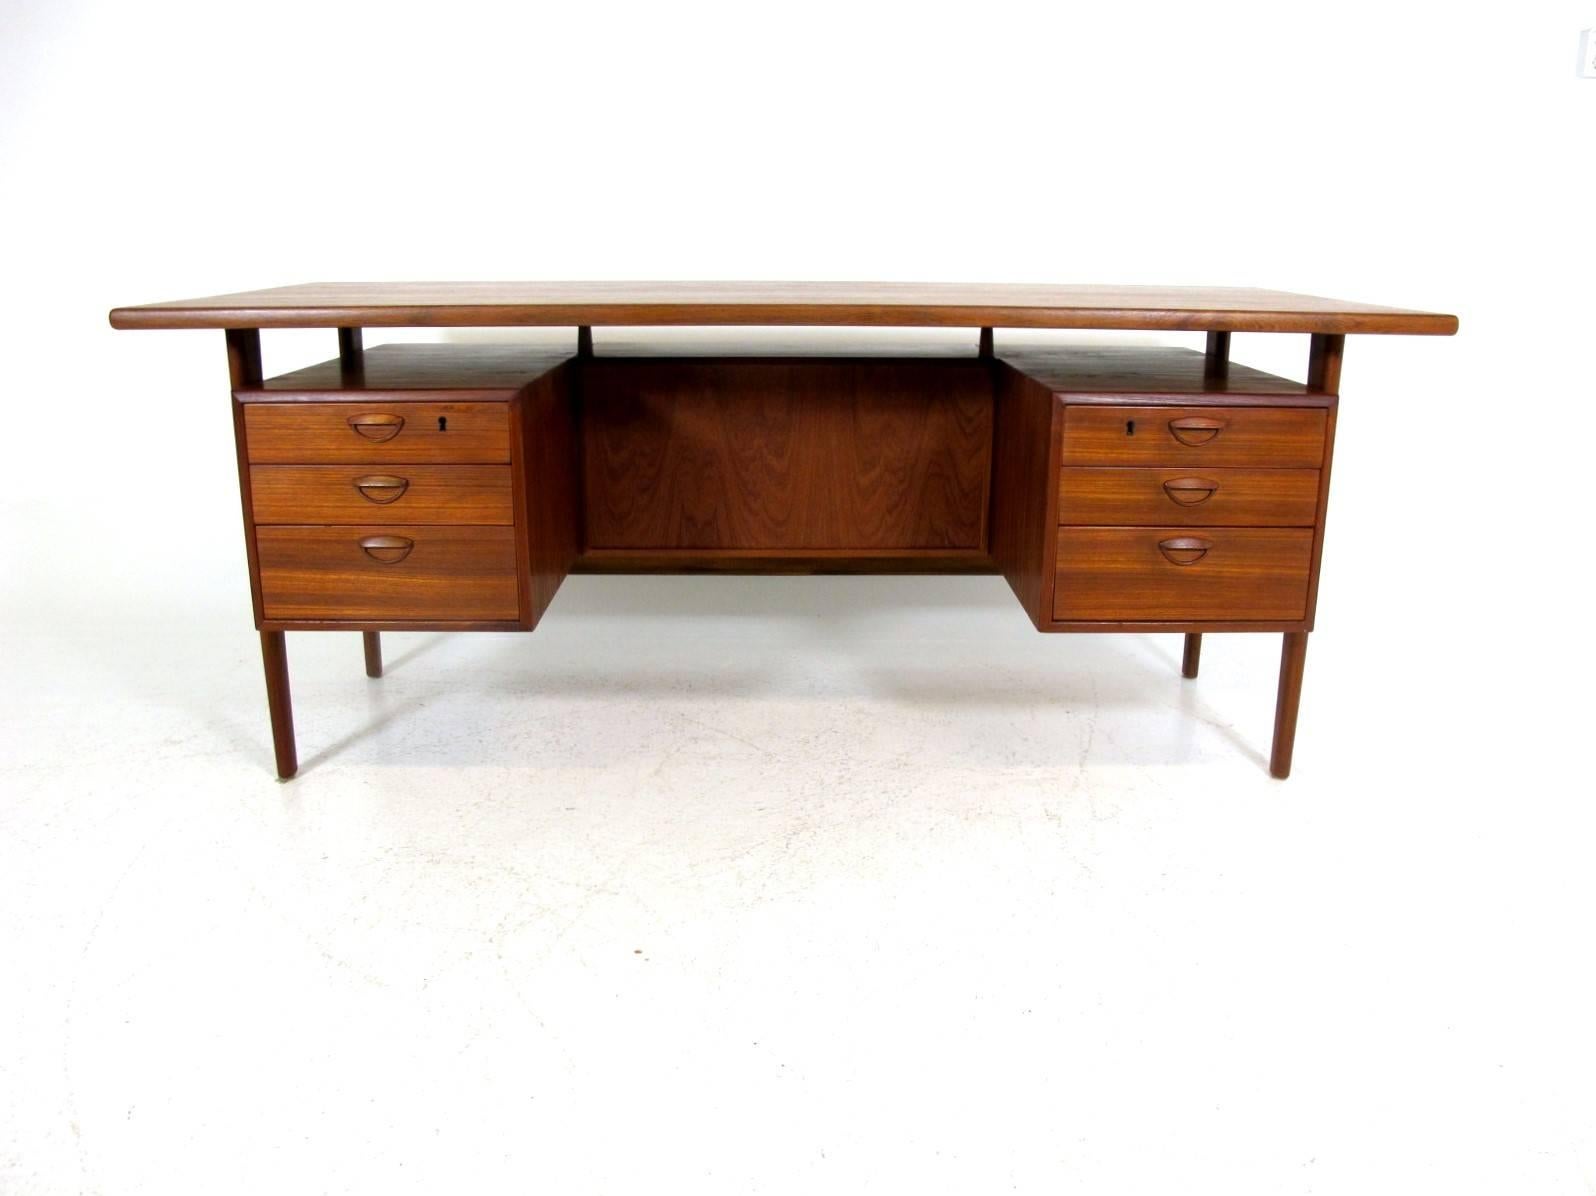 Free standing executive desk with a floating top. Designed by Kai Kristiansen, Model FM60, produced by Feldballes Møbelfabrik in Denmark. Made circa 1960s in teak and with tapered legs.